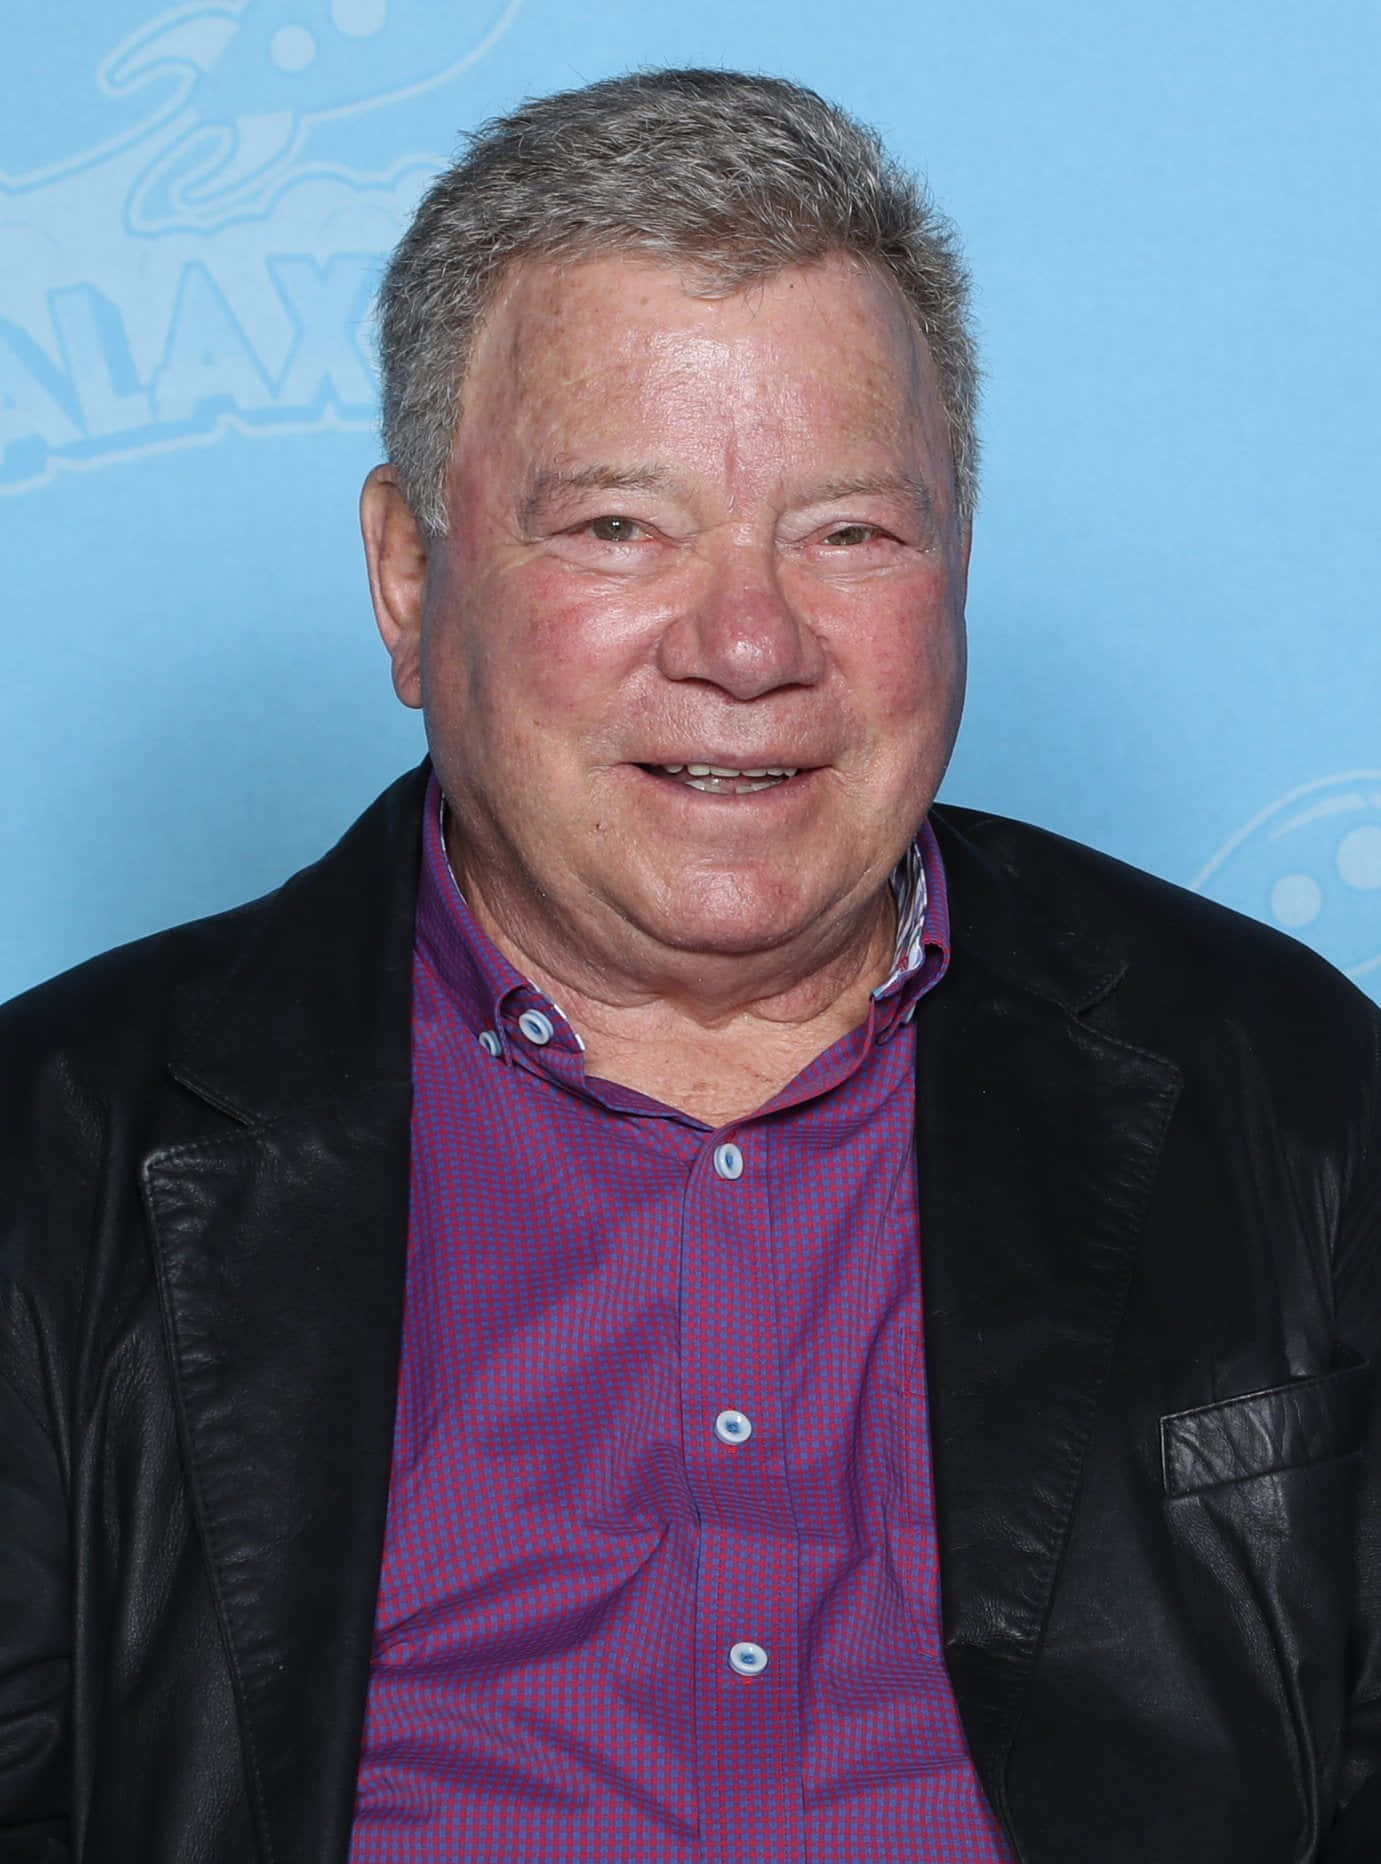 Legendary actor William Shatner in a thoughtful pose Wallpaper